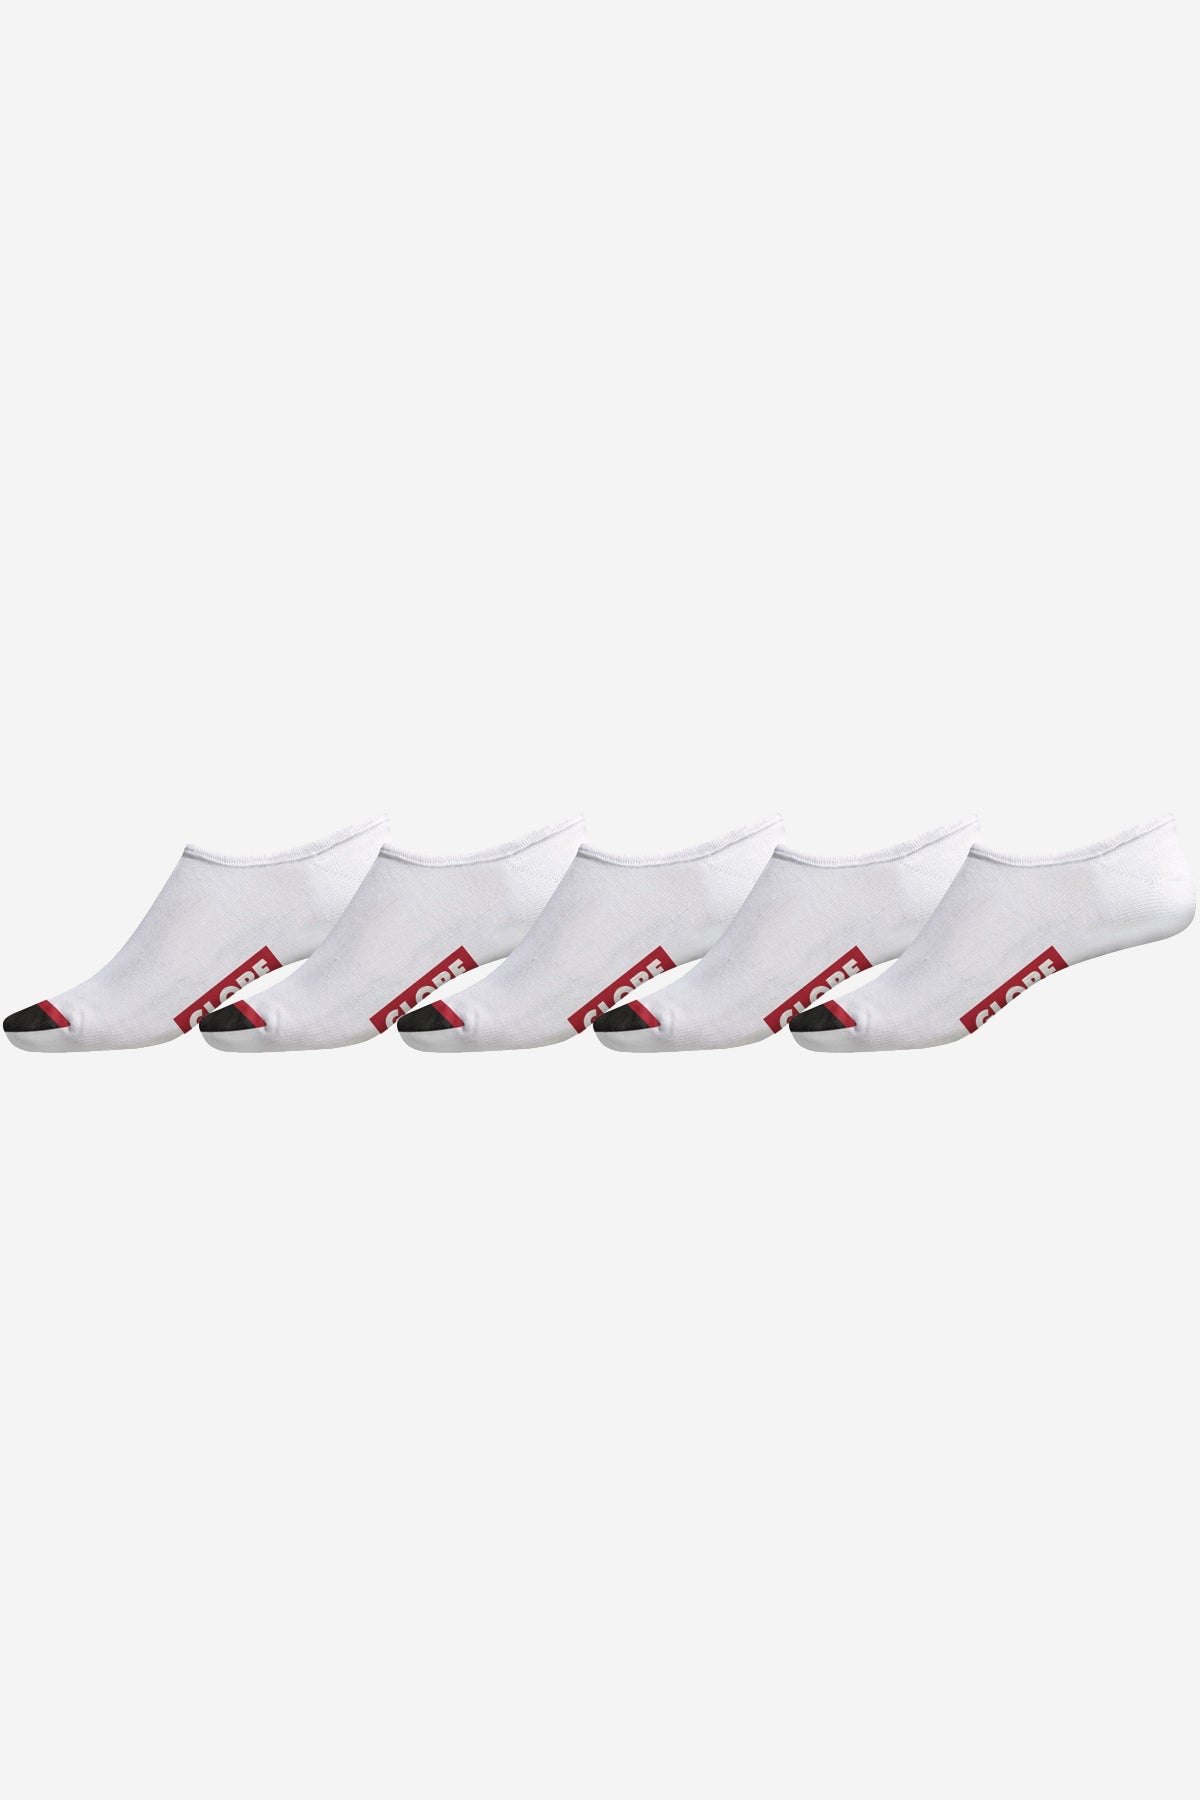 Tipper invisible sock 5 pack white